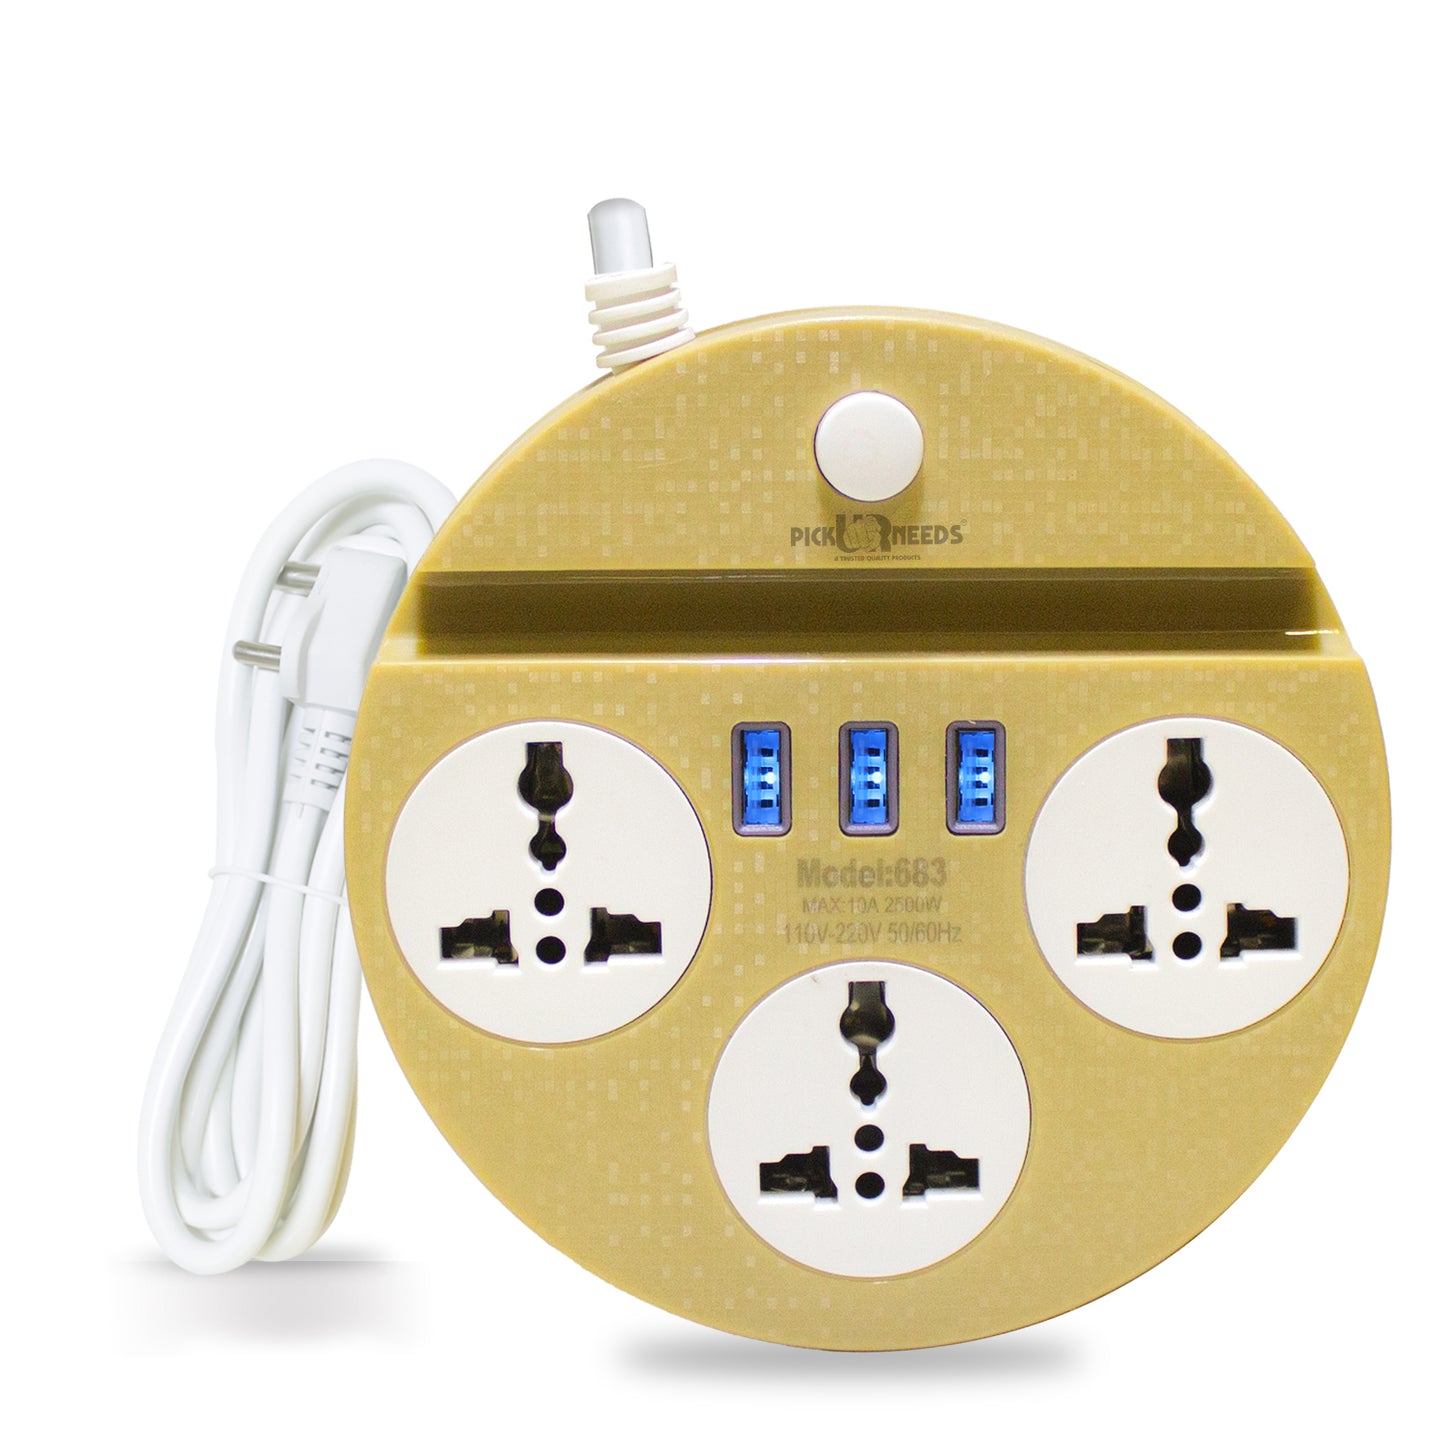 Pick Ur Needs Extension Cord Board with 3 USB Charging Ports and 3 Soc